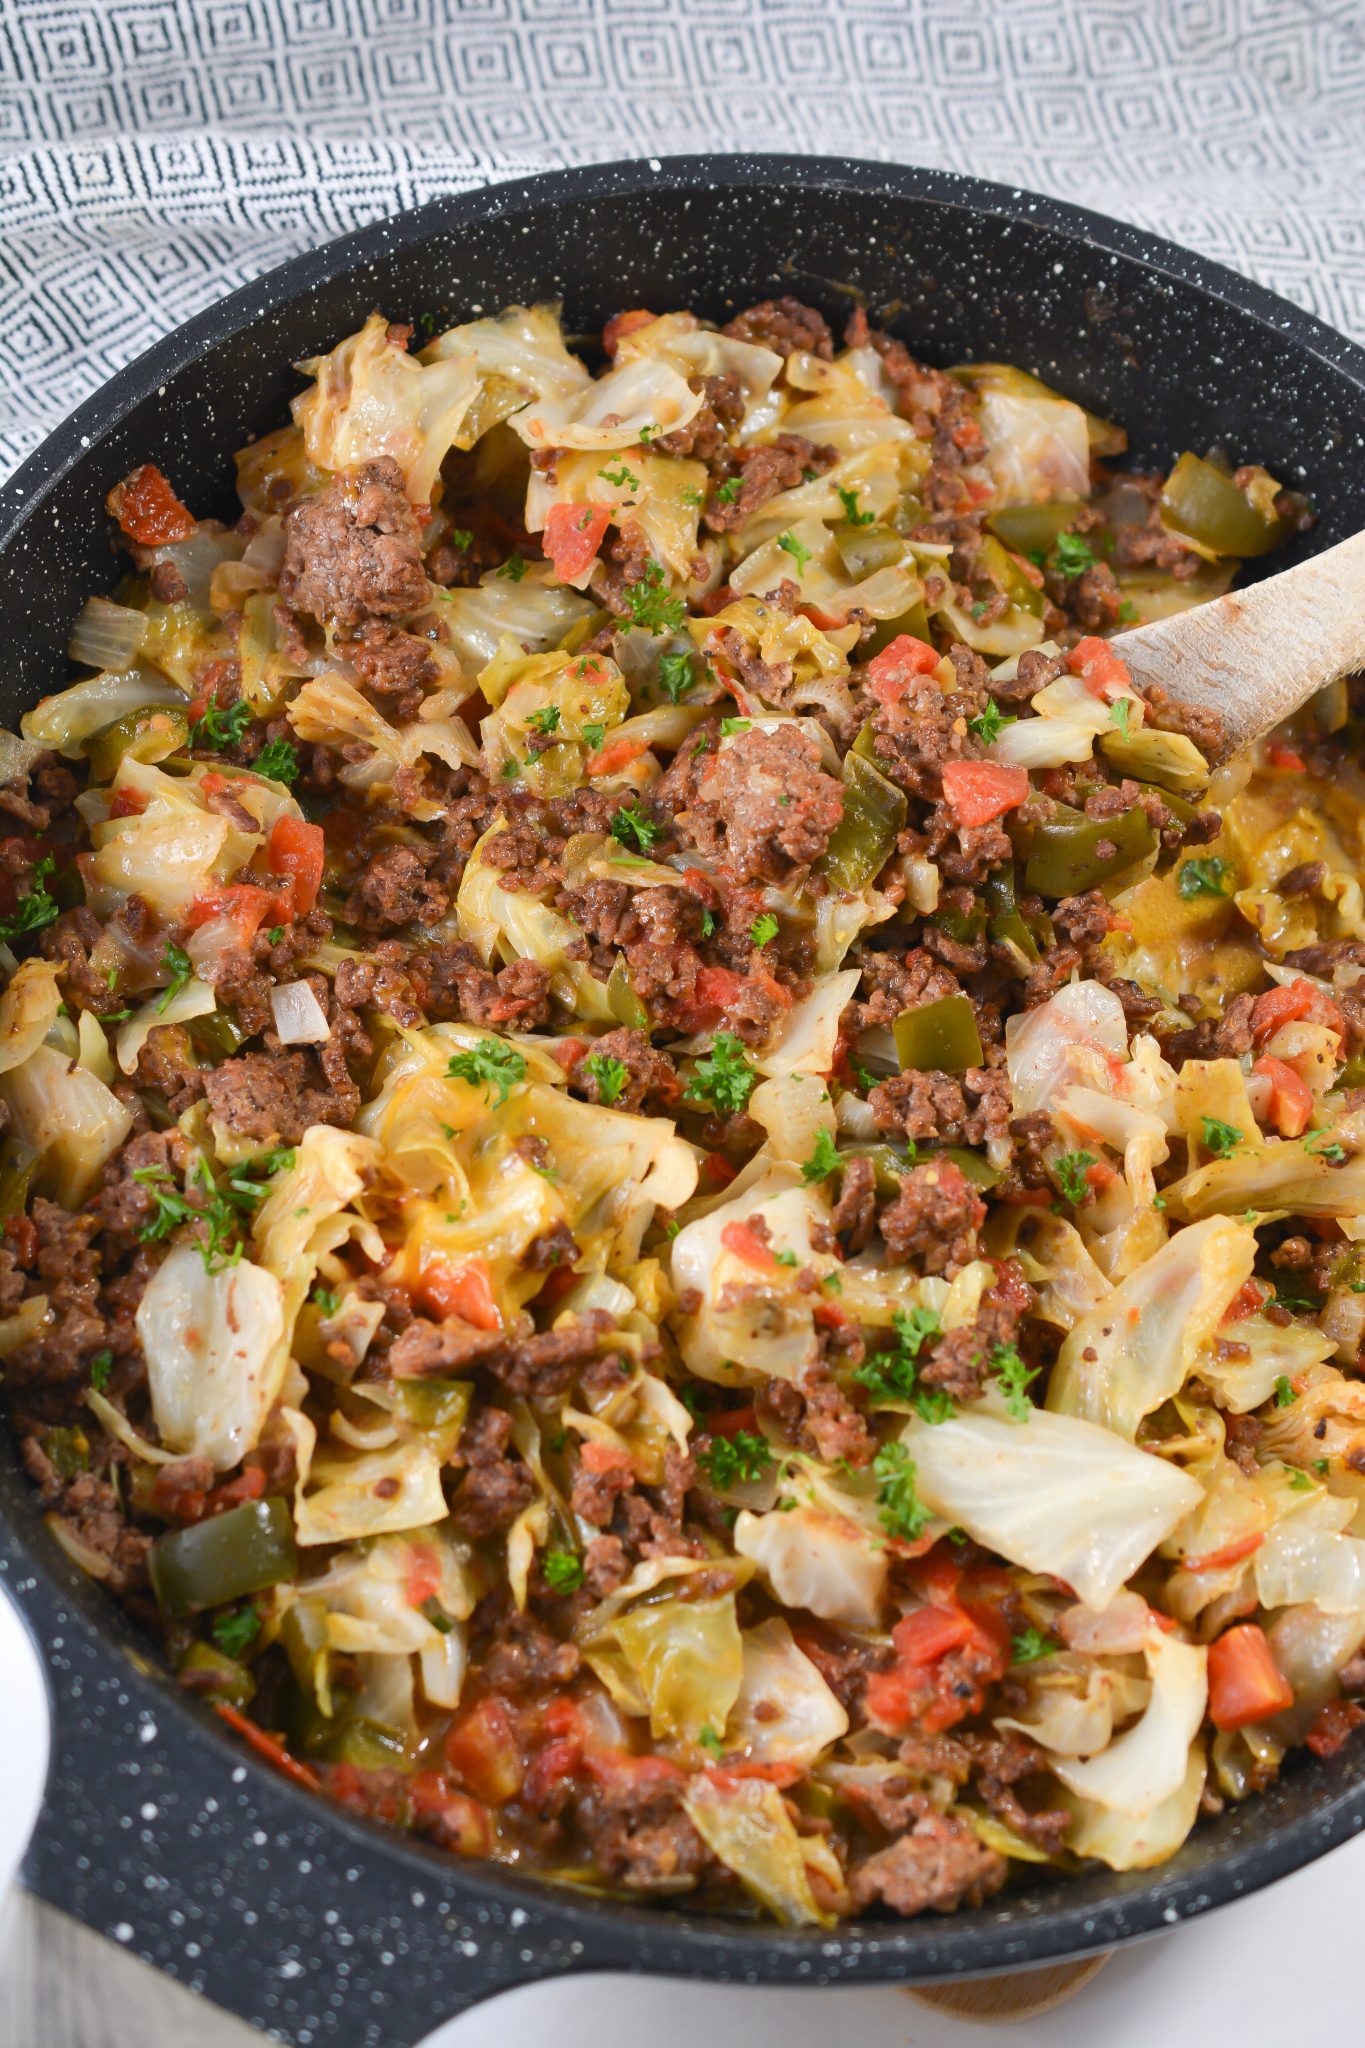 Cheesy Ground Beef And Cabbage Skillet 1 1365x2048 